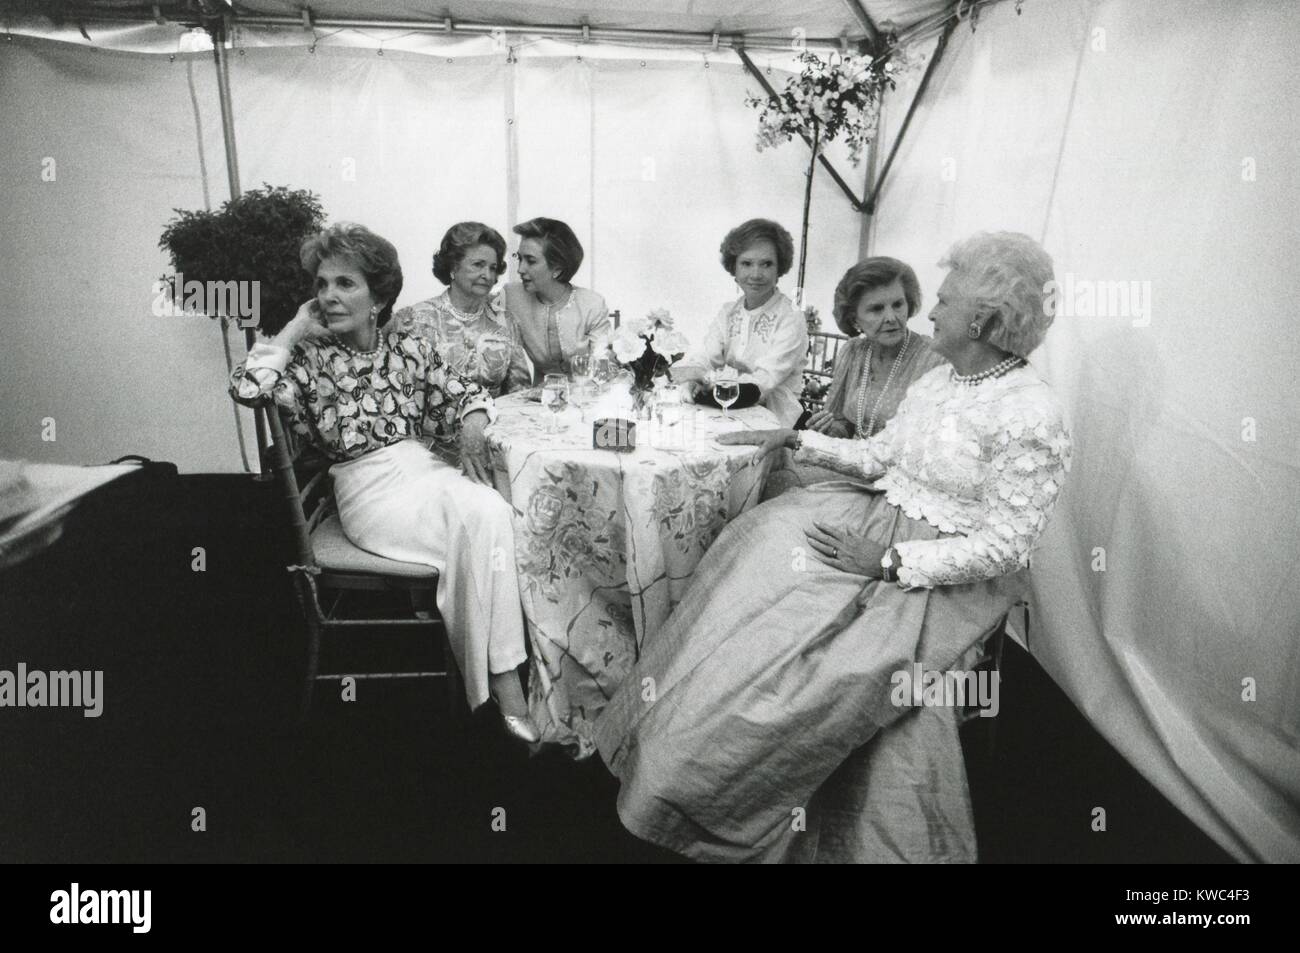 National Garden Gala, 'A Tribute to America's First Ladies' at the U.S. Botanical Garden. May 11, 1994. First Ladies, L-R: Nancy Reagan, Ladybird Johnson, Hillary Rodham Clinton, Rosalyn Carter, Betty Ford, and Barbara Bush. (BSLOC 2015 2 191) Stock Photo